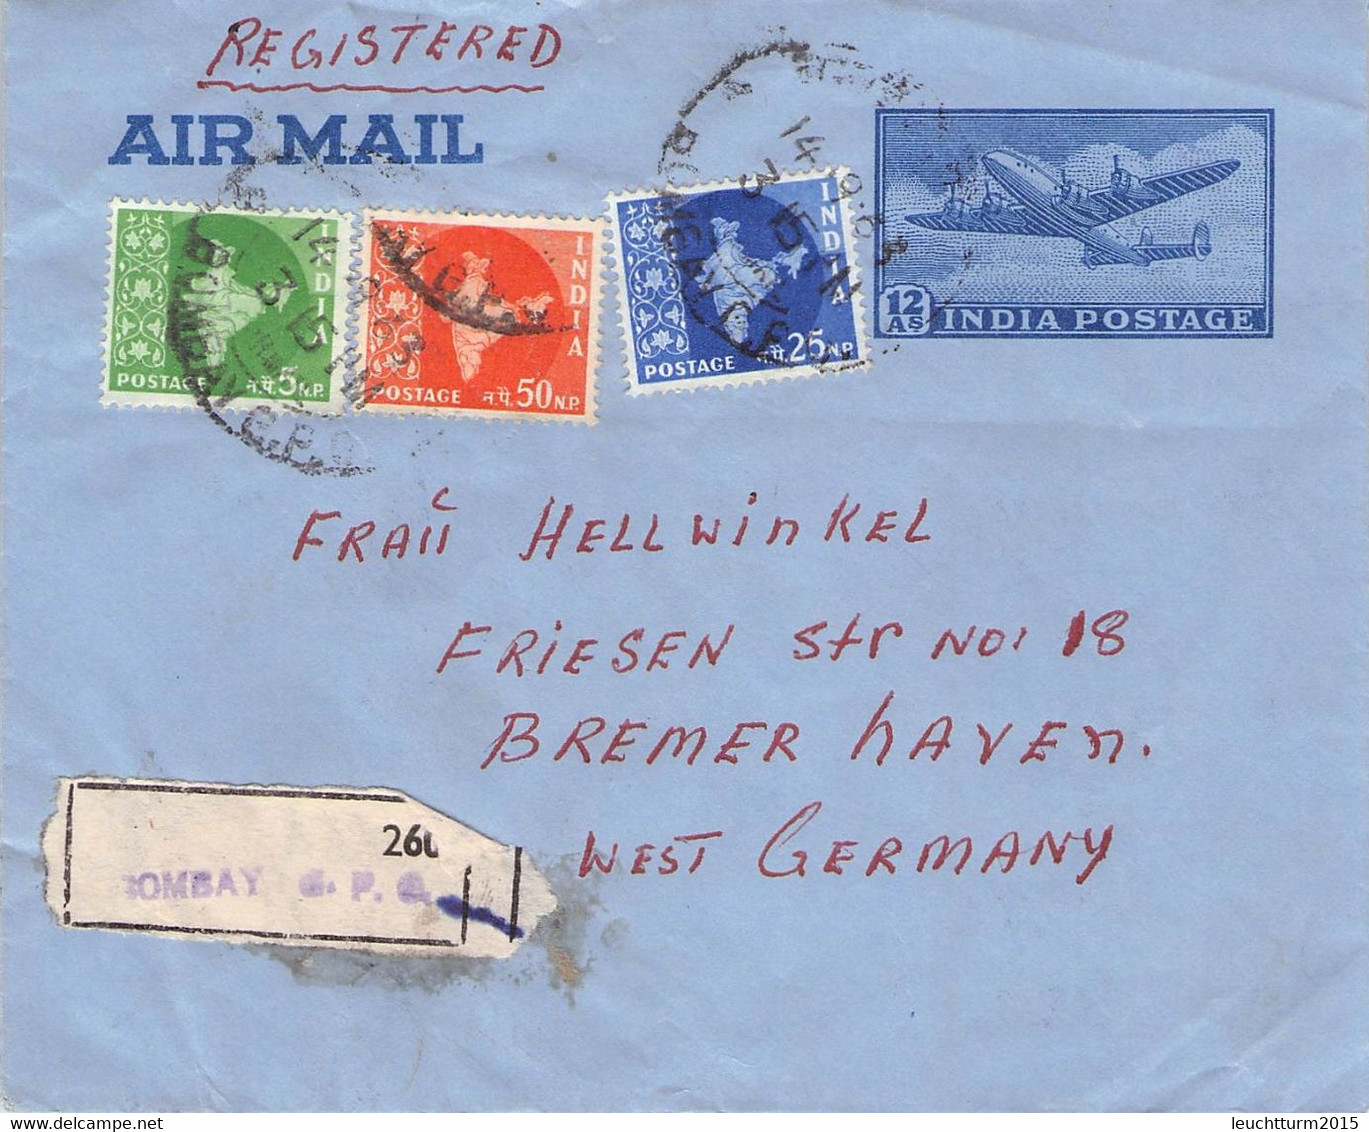 INDIA - AIRMAIL 1963 BOMBAY > BREMERHAVEN/GEERMANY /G114 - Poste Aérienne